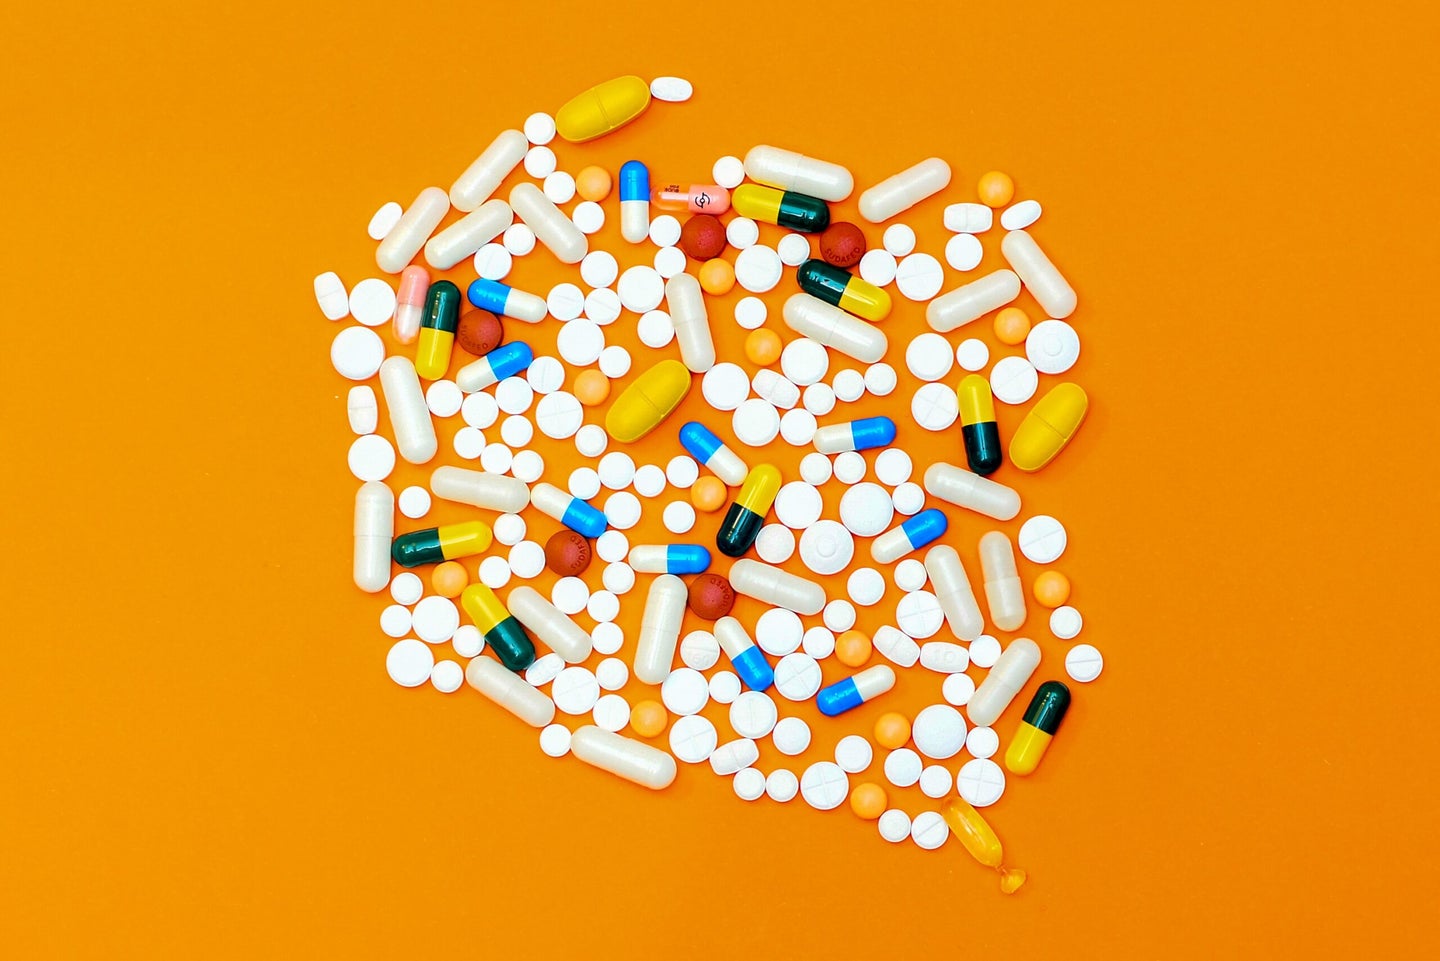 A pile of pills of various shapes and colors on an orange background. Some of these may be allergy medications.